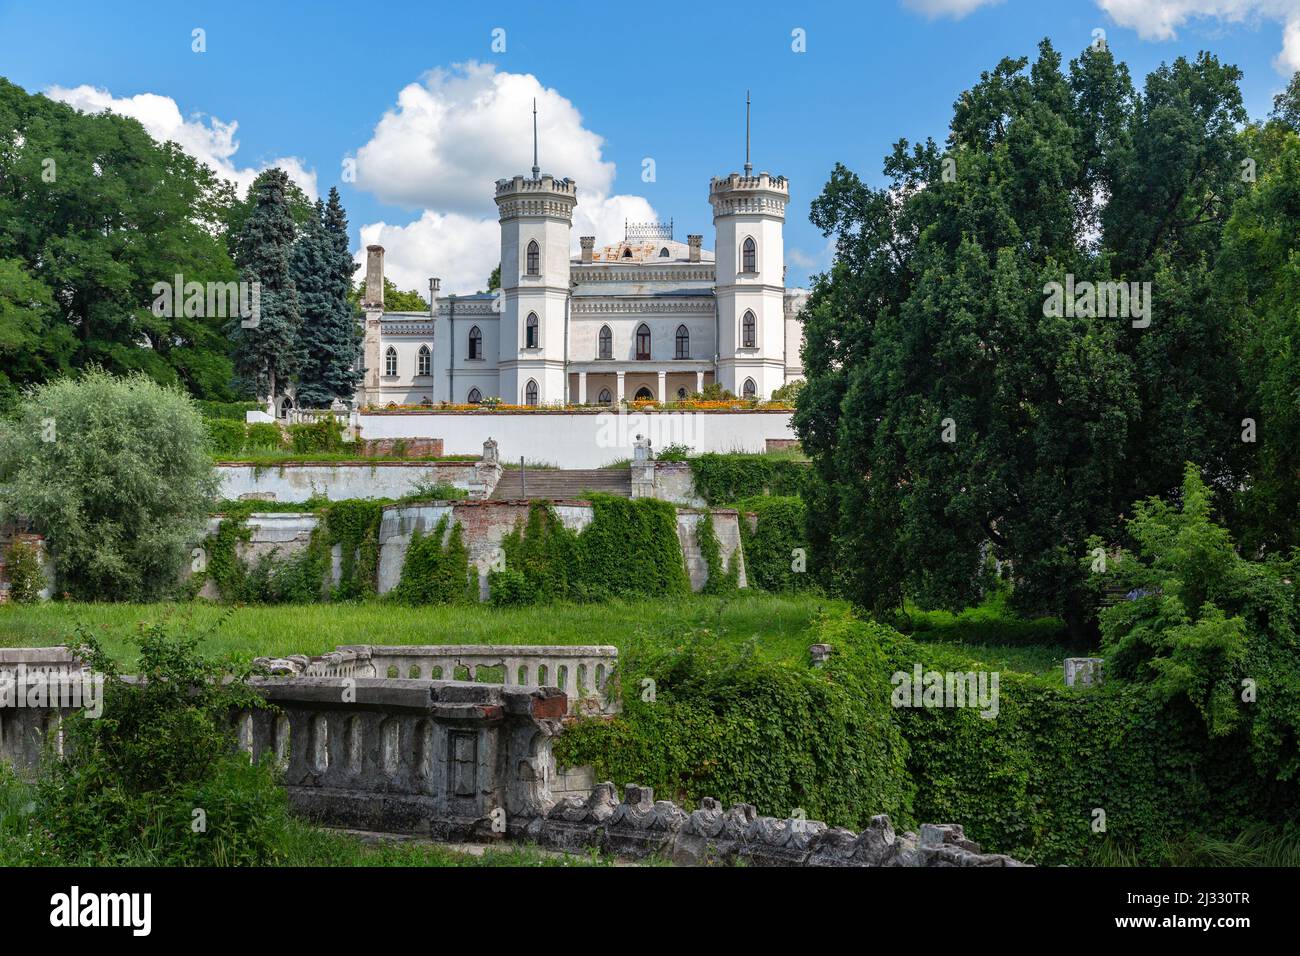 SHAROVKA, UKRAINE - JULY 24, 2021: This is the park and palace of the Sharovka estate (19th century) in the neo-Gothic style. Stock Photo